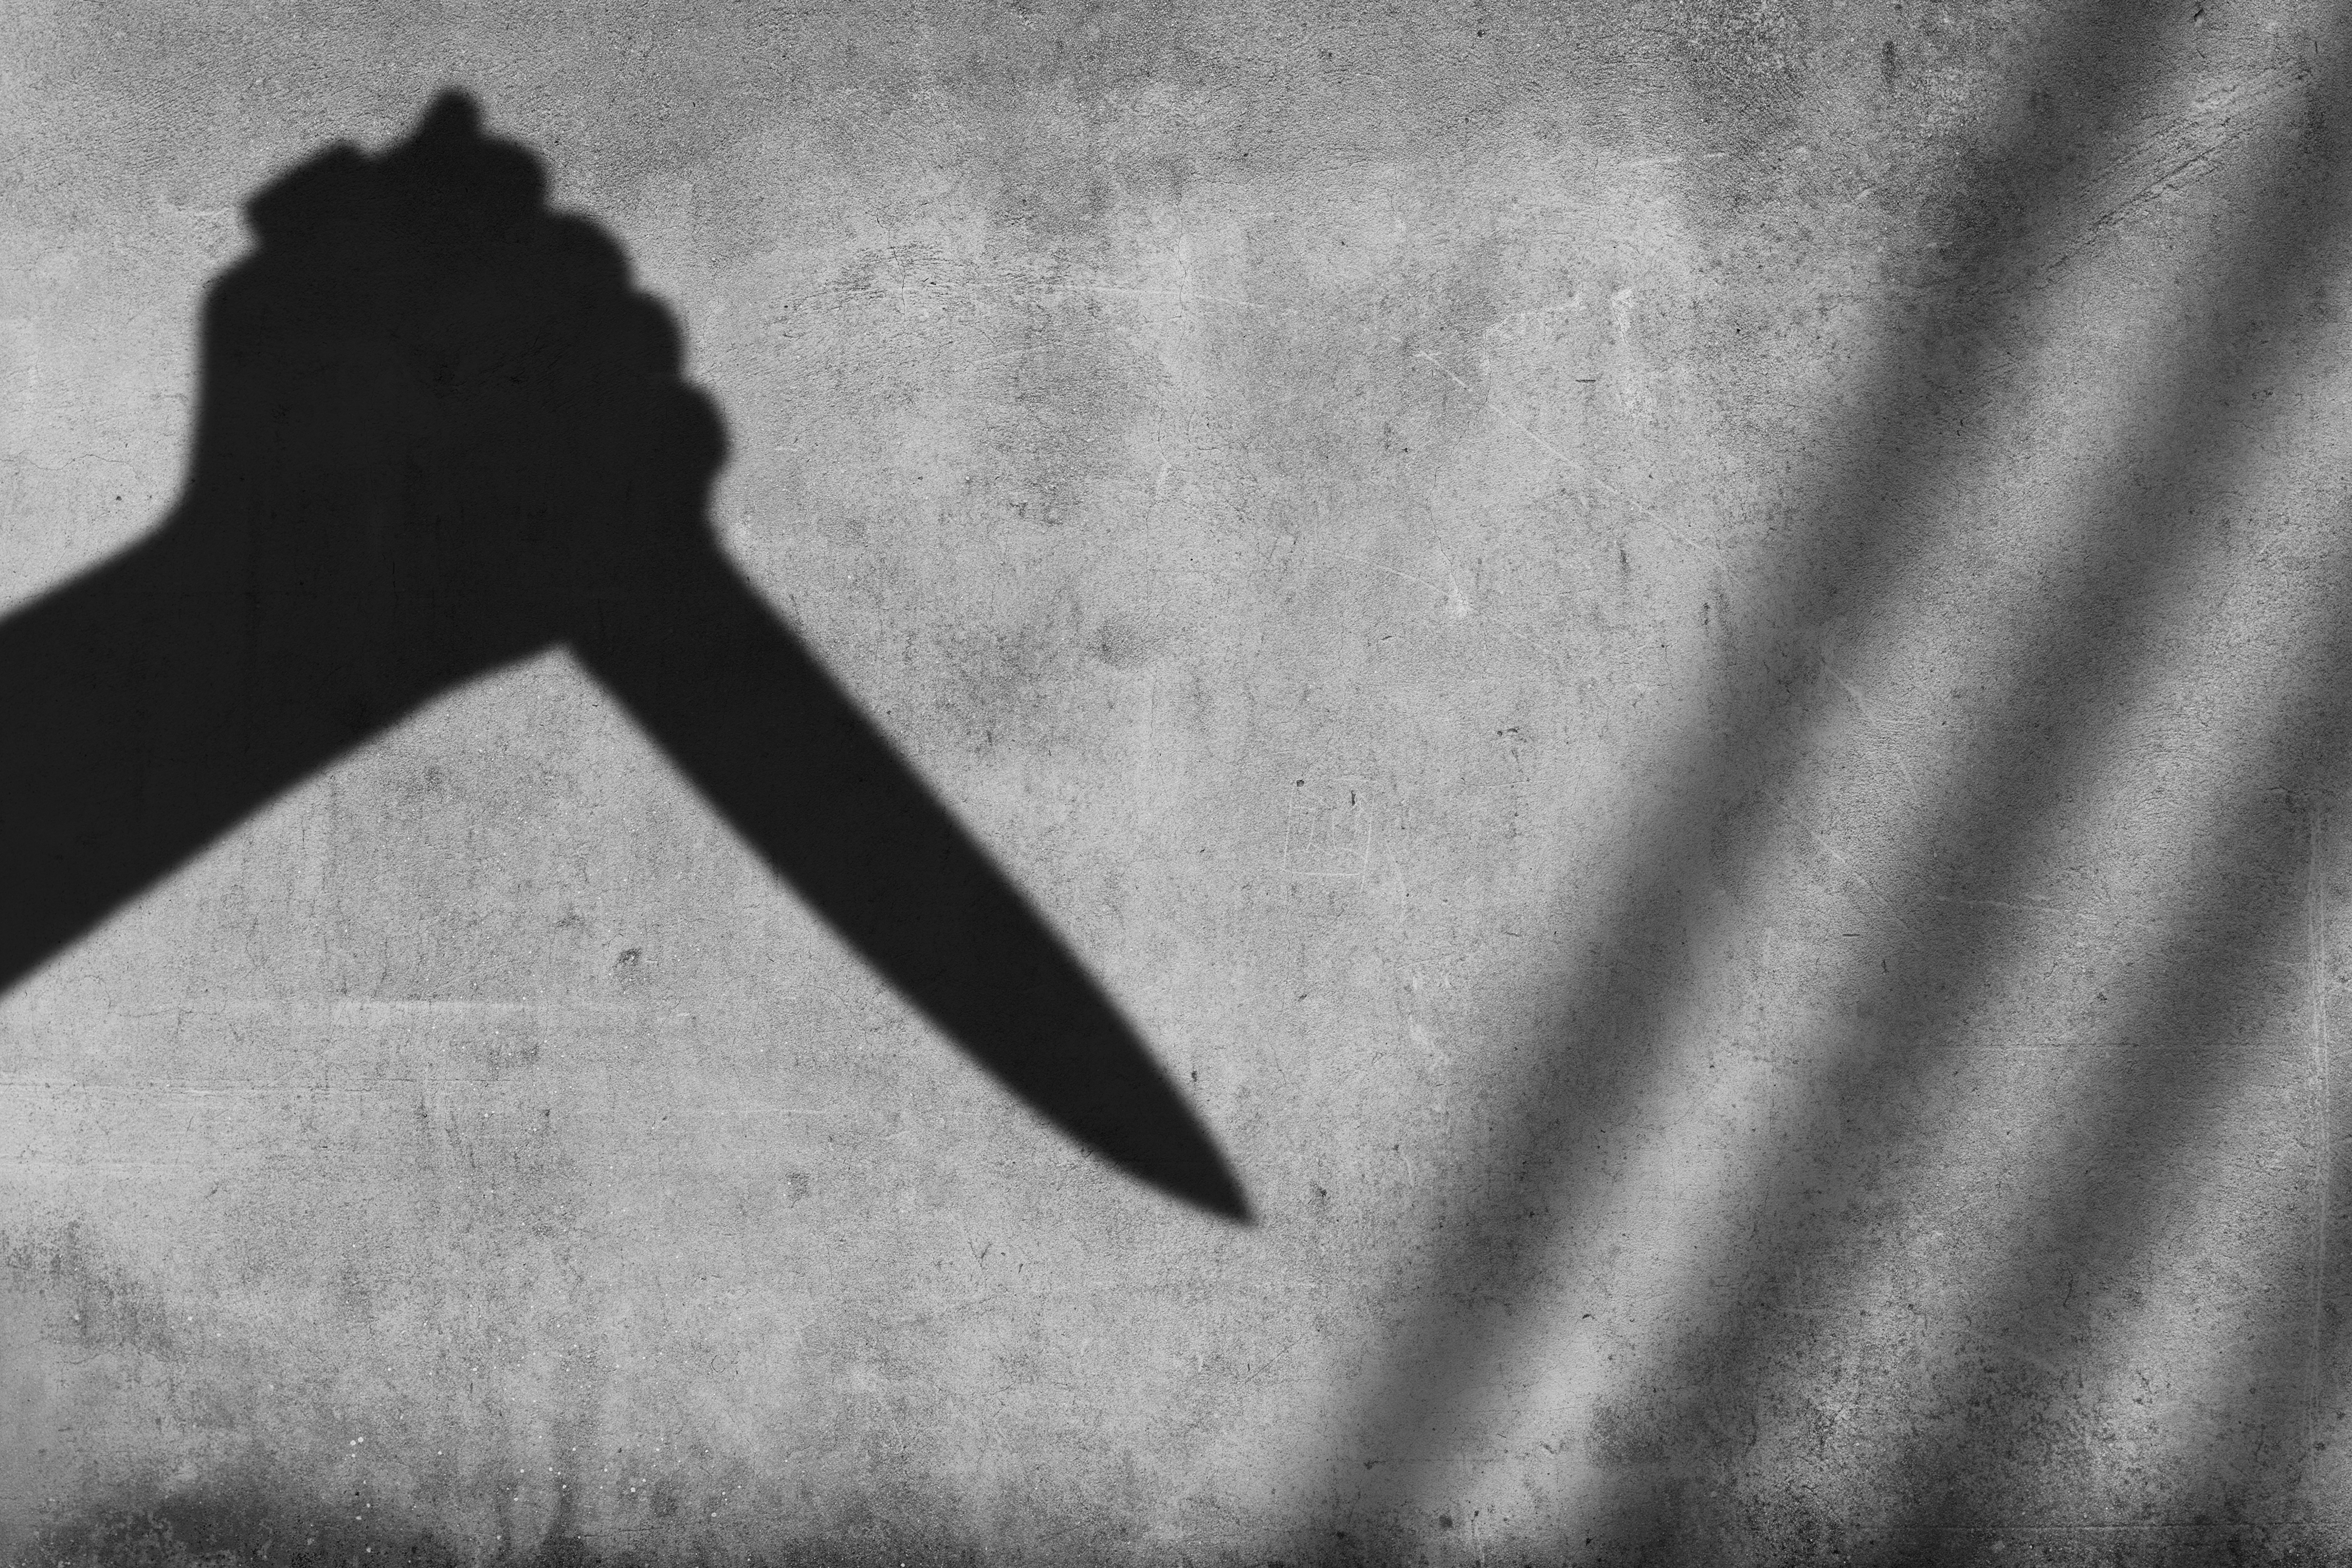 Shadow of the hand holding a knife on wall background - stock photo